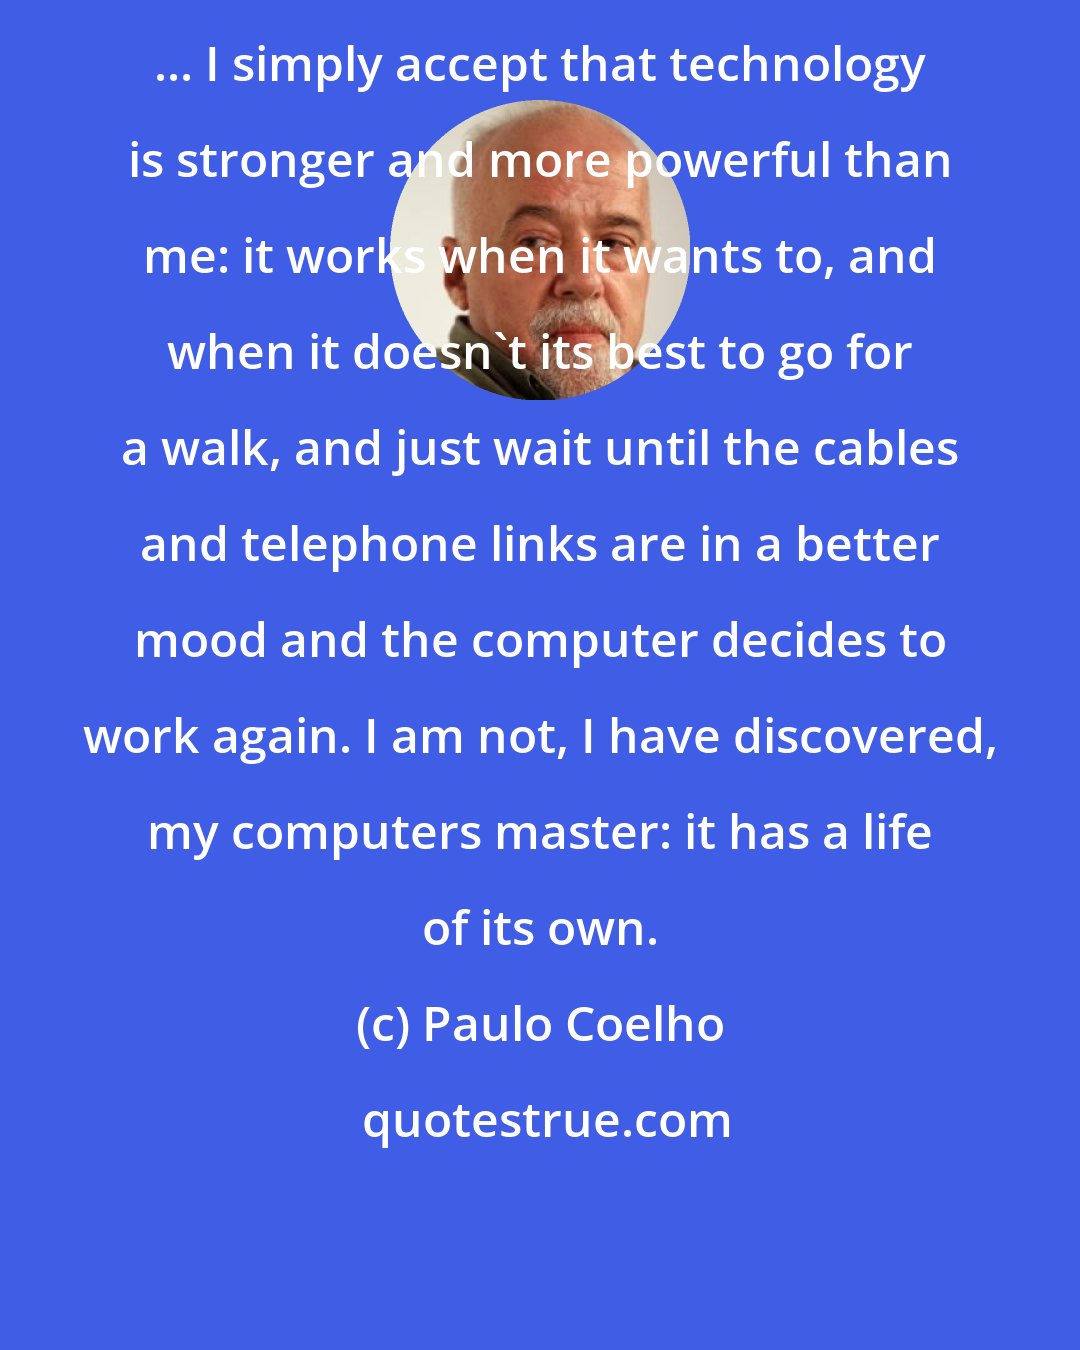 Paulo Coelho: ... I simply accept that technology is stronger and more powerful than me: it works when it wants to, and when it doesn't its best to go for a walk, and just wait until the cables and telephone links are in a better mood and the computer decides to work again. I am not, I have discovered, my computers master: it has a life of its own.